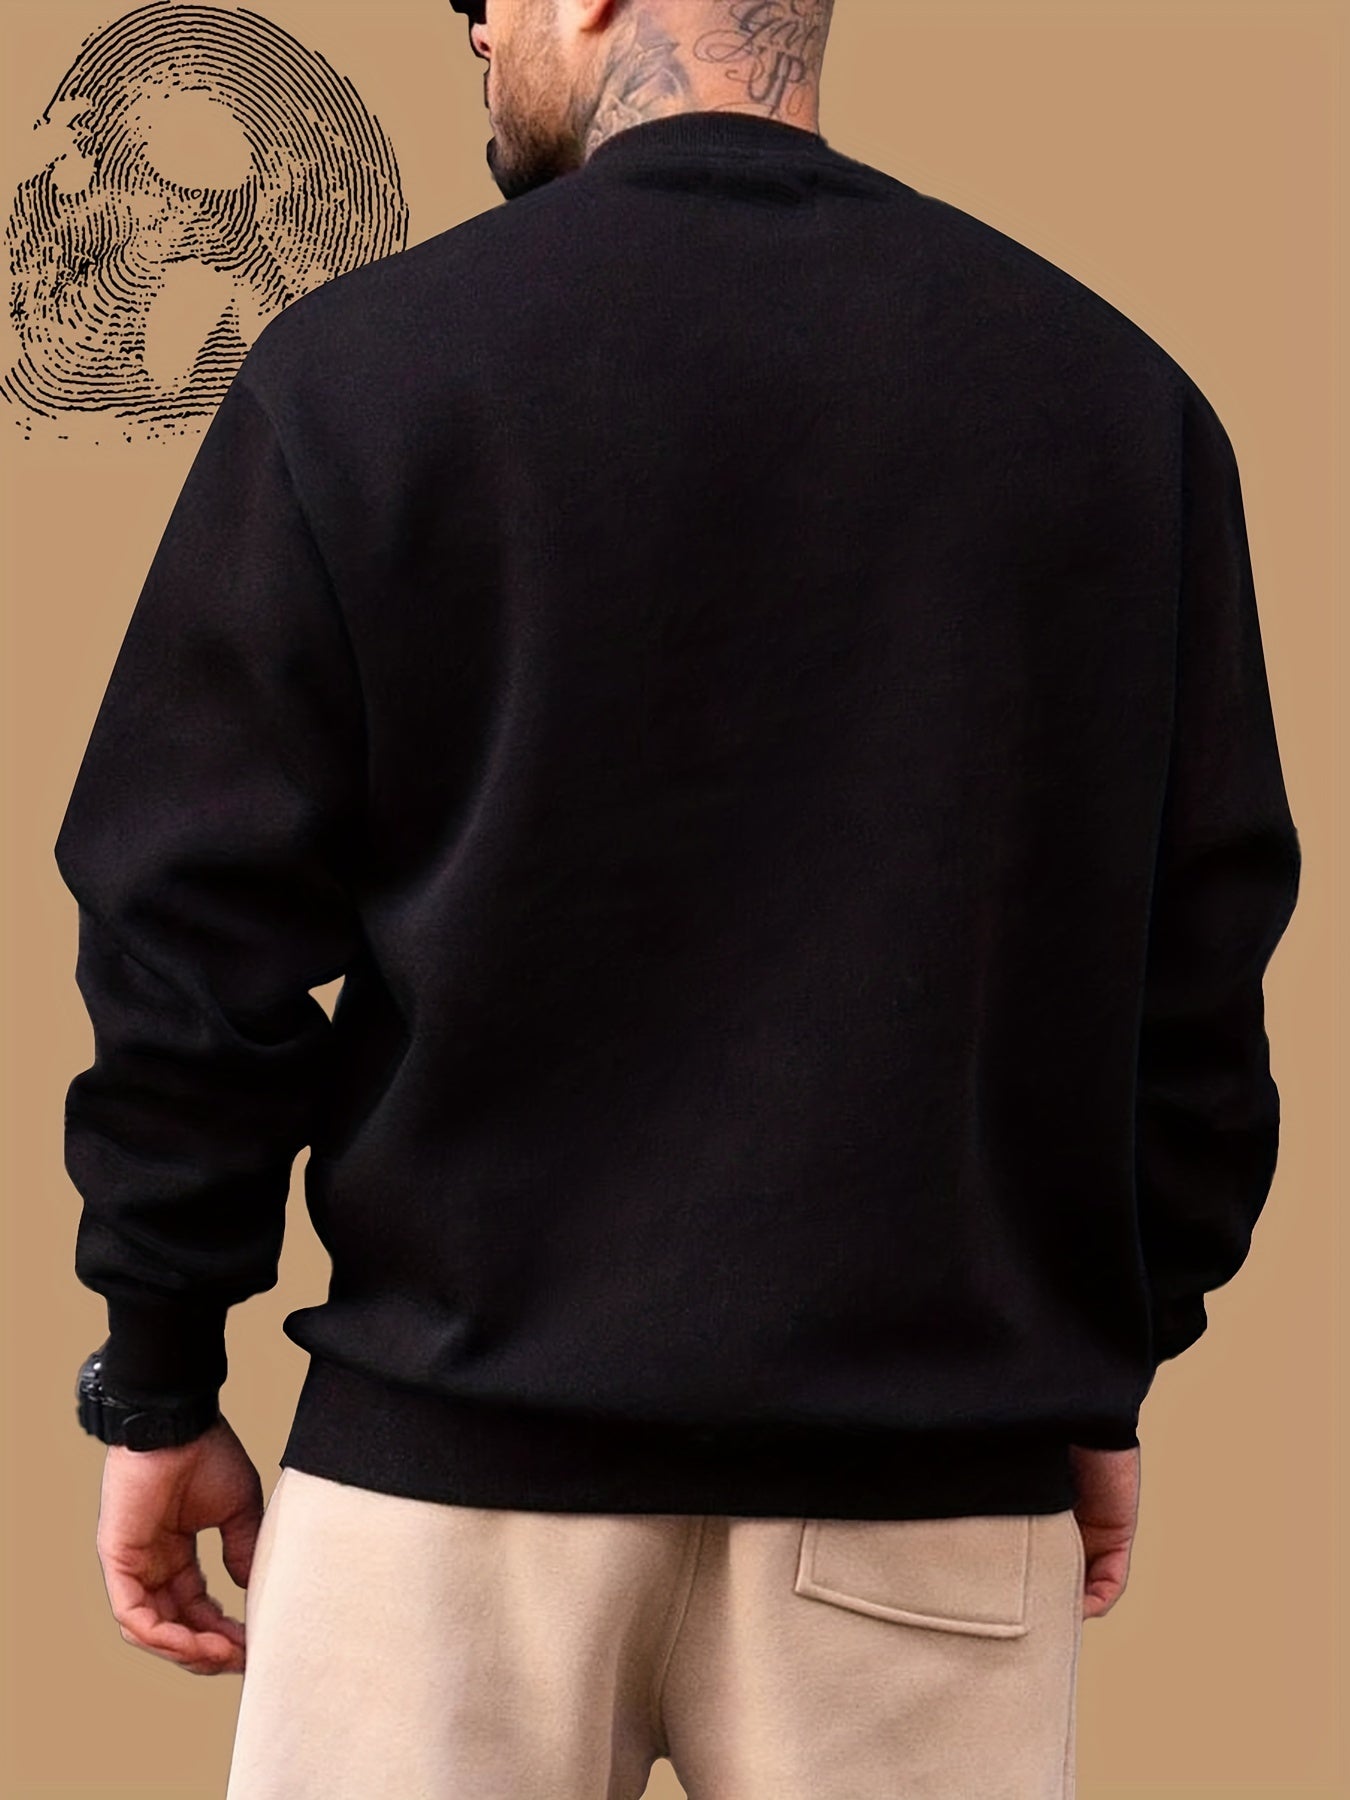 Anime Boy With Lots Of Hair Print, Men's Pullover Sweatshirt, Casual Crew Neck Jumper For Spring Fall, Moisture Wicking And Breathable Sweater, As Gifts